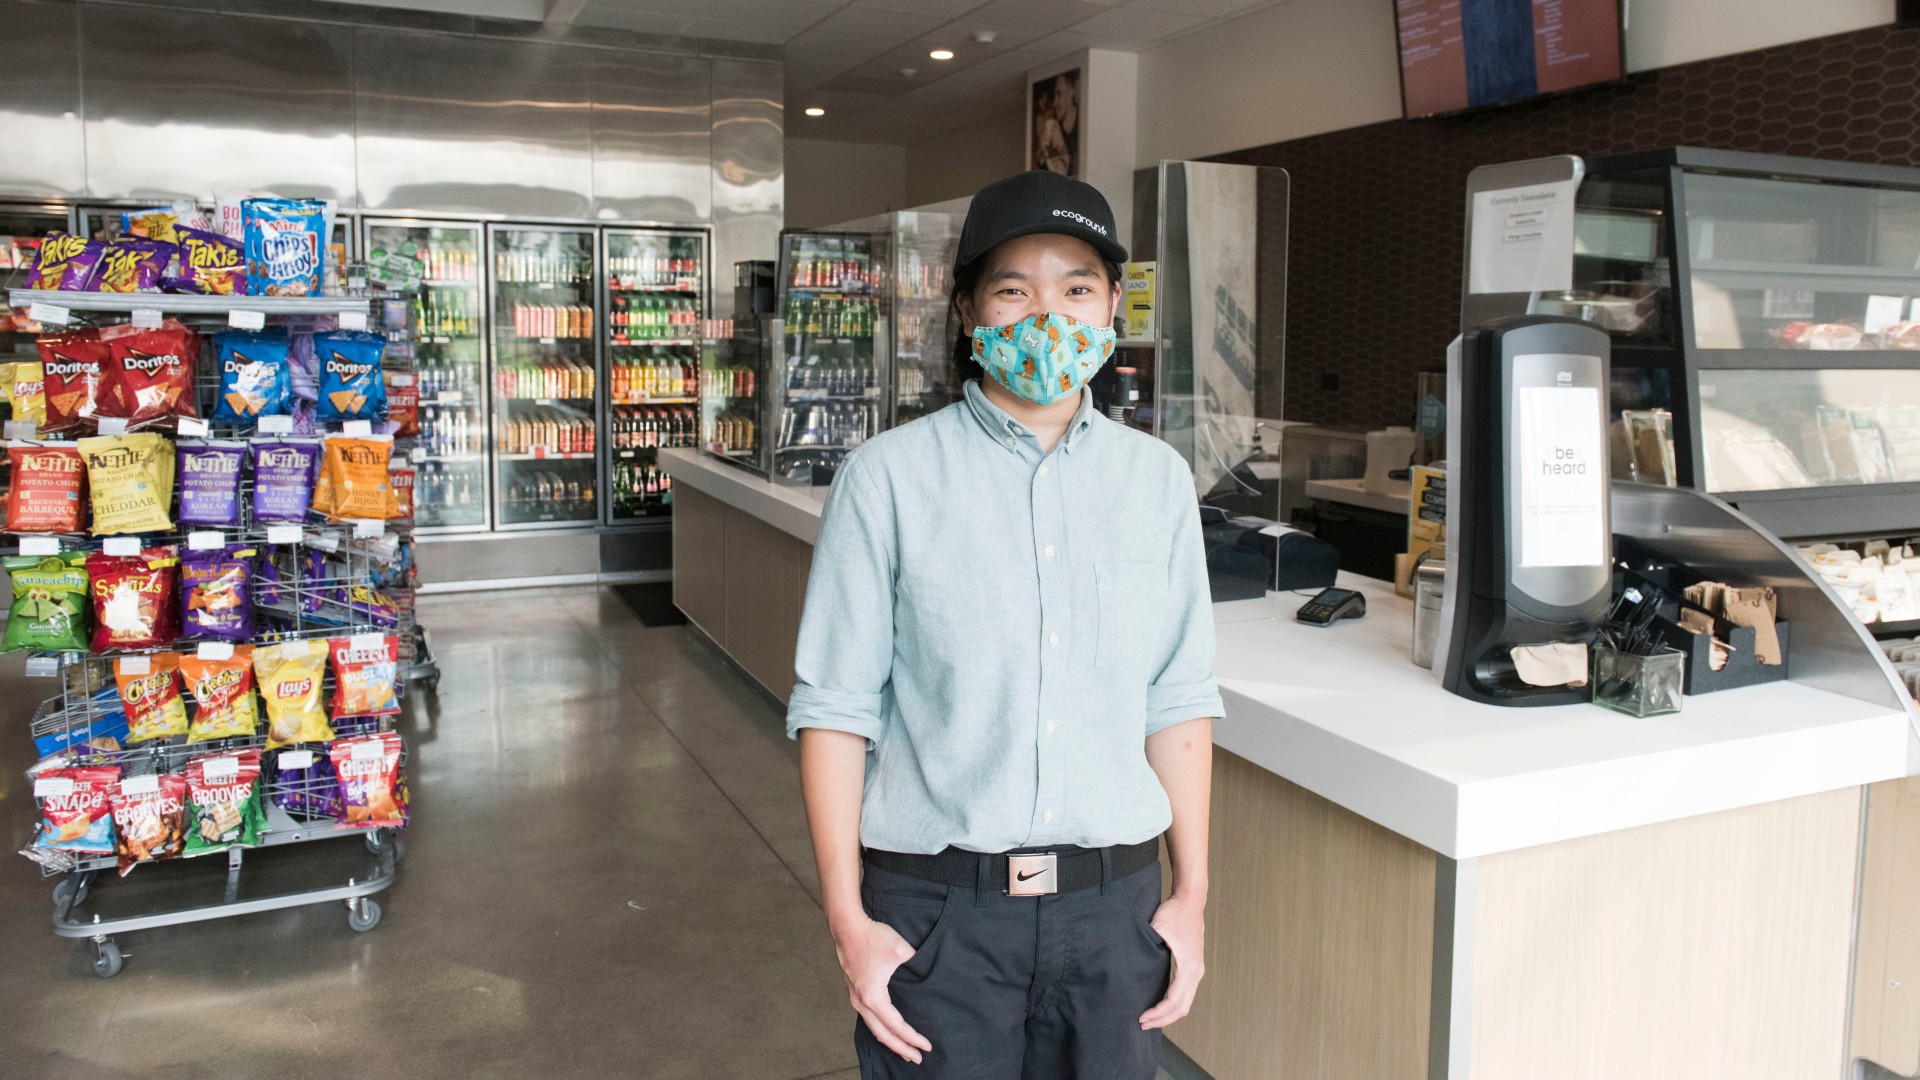 Person with a baseball cap and a facial covering poses for a photo in a convenience store.